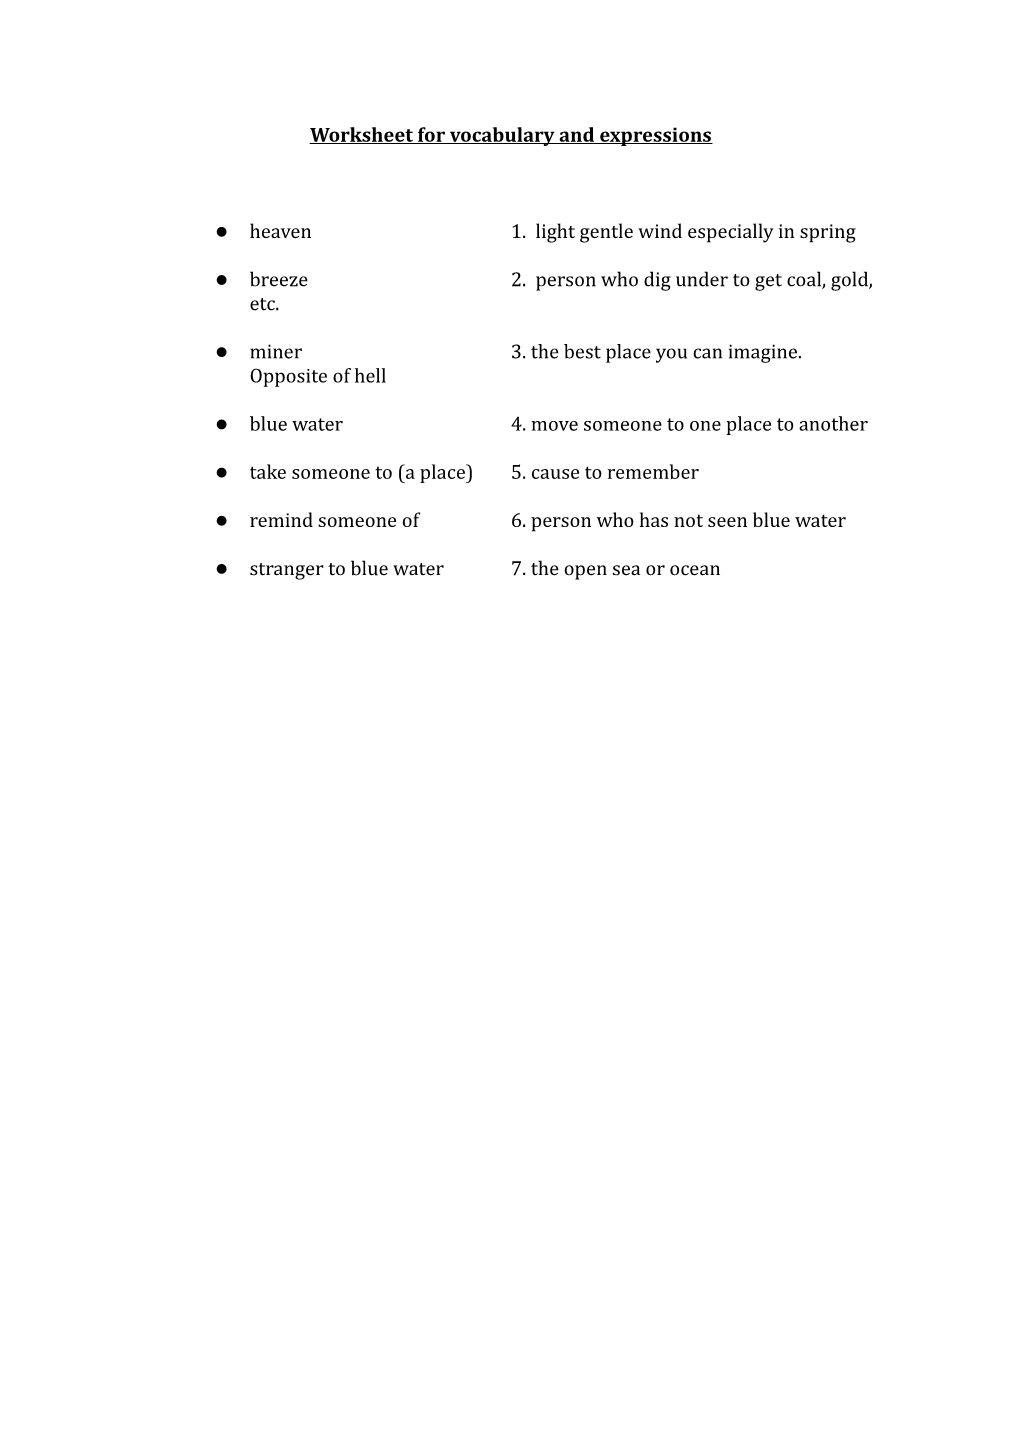 Worksheet for Vocabulary and Expressions